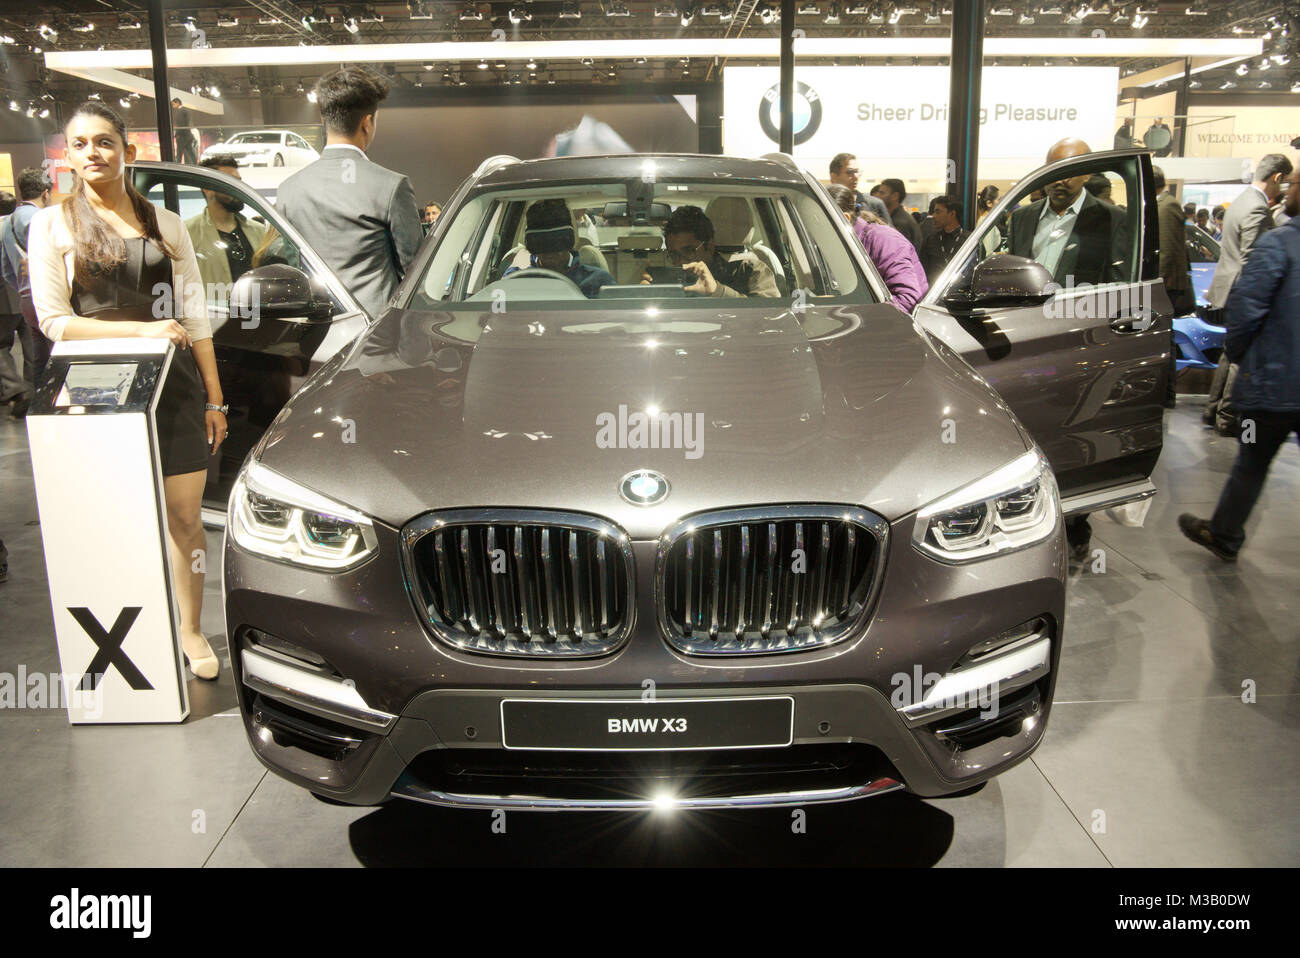 Greater Noida, India. 9th February 2018. Visitors try to get a feel of BMW X3 20d Luxury Line car on display at the Auto Expo 2018 at India Expo Mart in Greater Noida, India. The Auto Expo is a biennial event and is being held during 9th to 14th February 2018. Credit: Karunesh Johri/Alamy Live News. Stock Photo